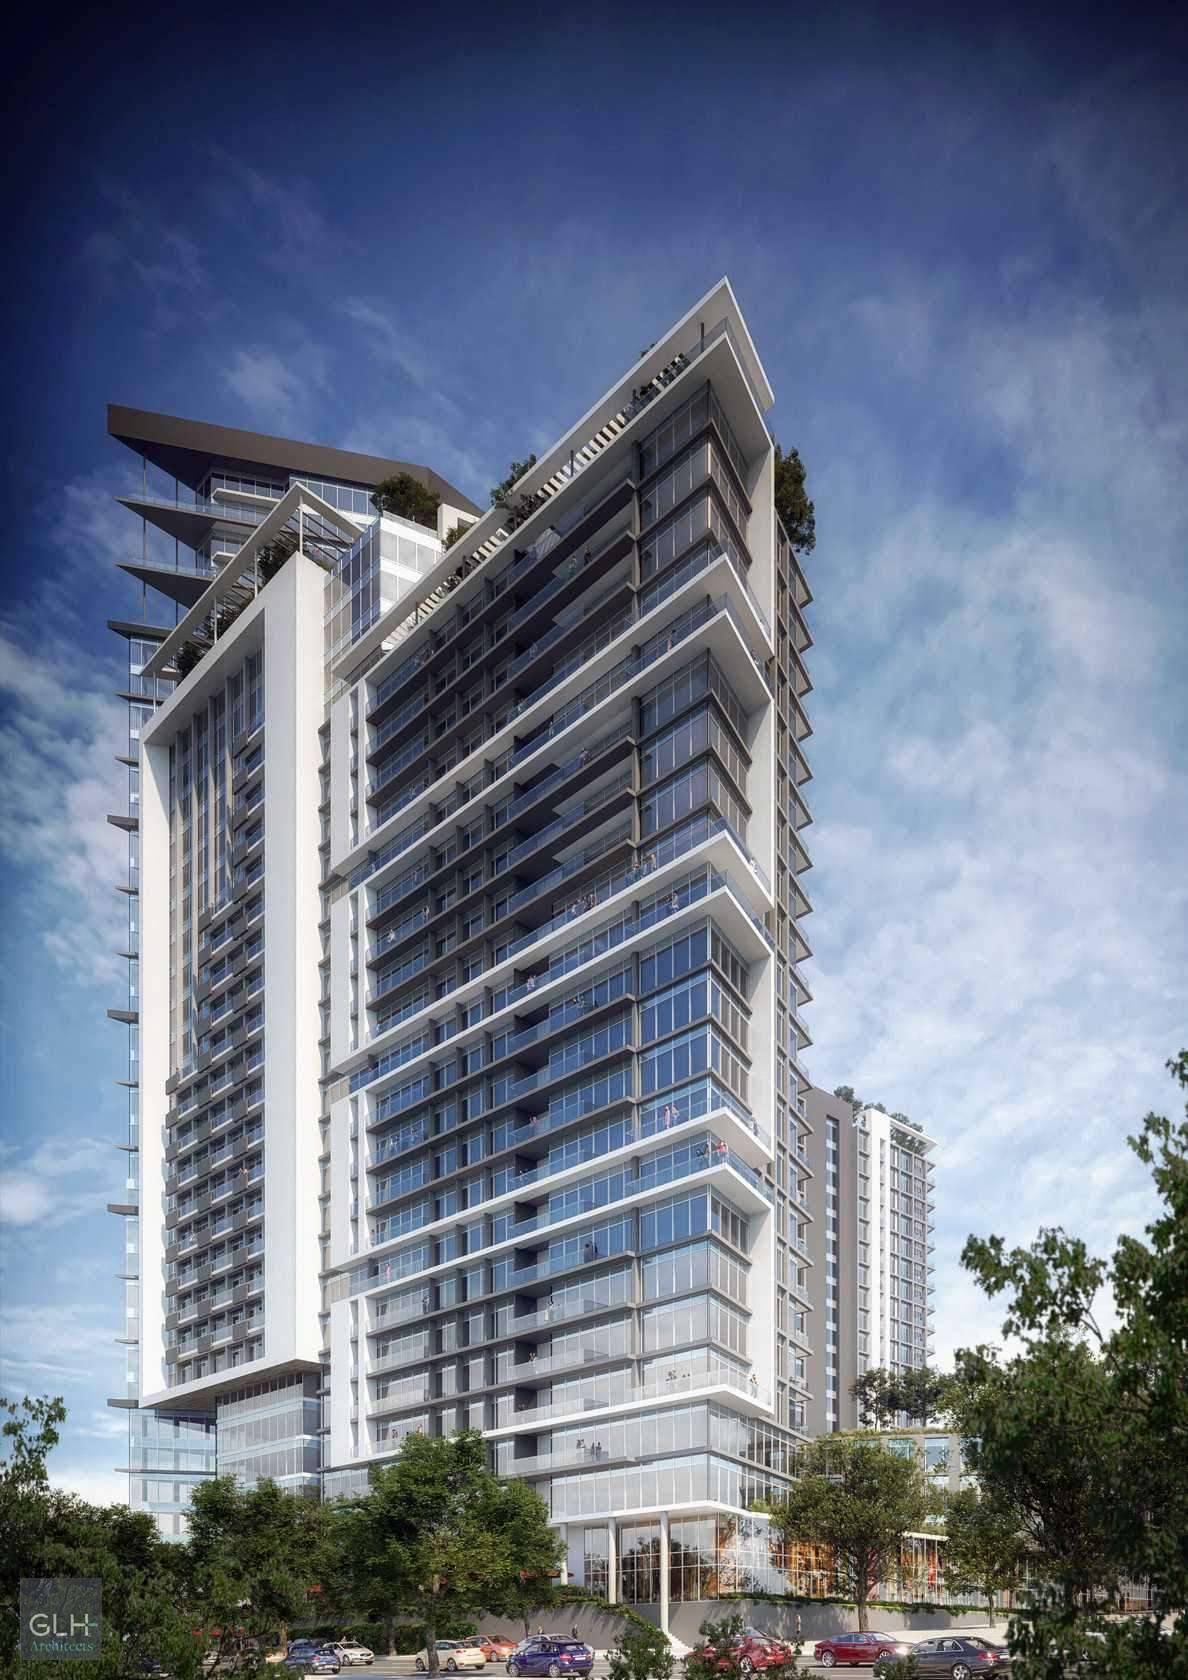 Exterior render of mixed use housing high rise